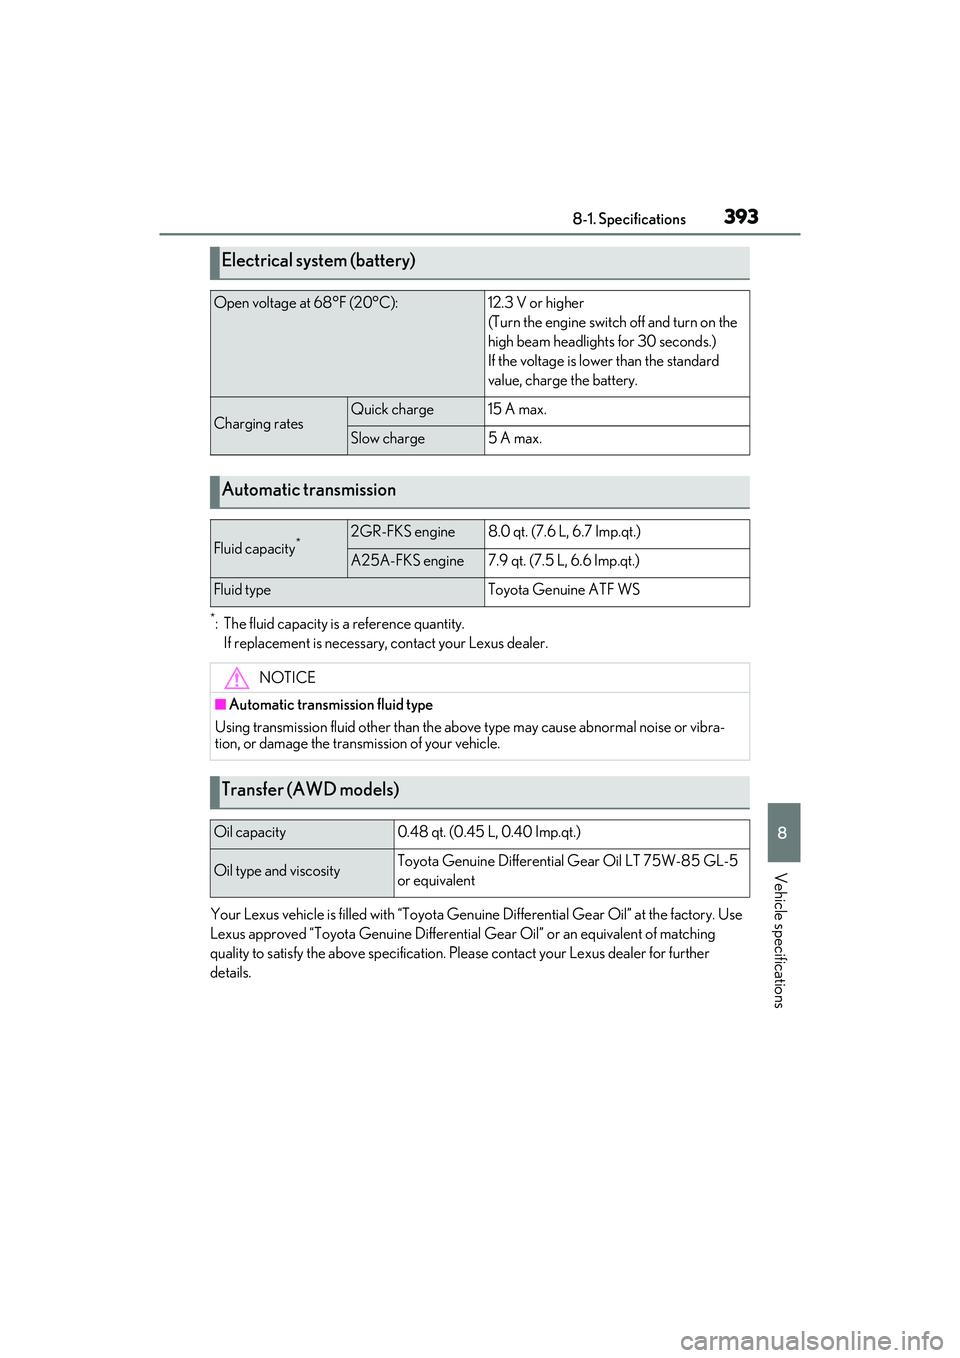 LEXUS ES350 2022  Owners Manual 3938-1. Specifications
8
Vehicle specifications
*: The fluid capacity is a reference quantity.If replacement is necessary, contact your Lexus dealer.
Your Lexus vehicle is filled with “Toyota Genuin